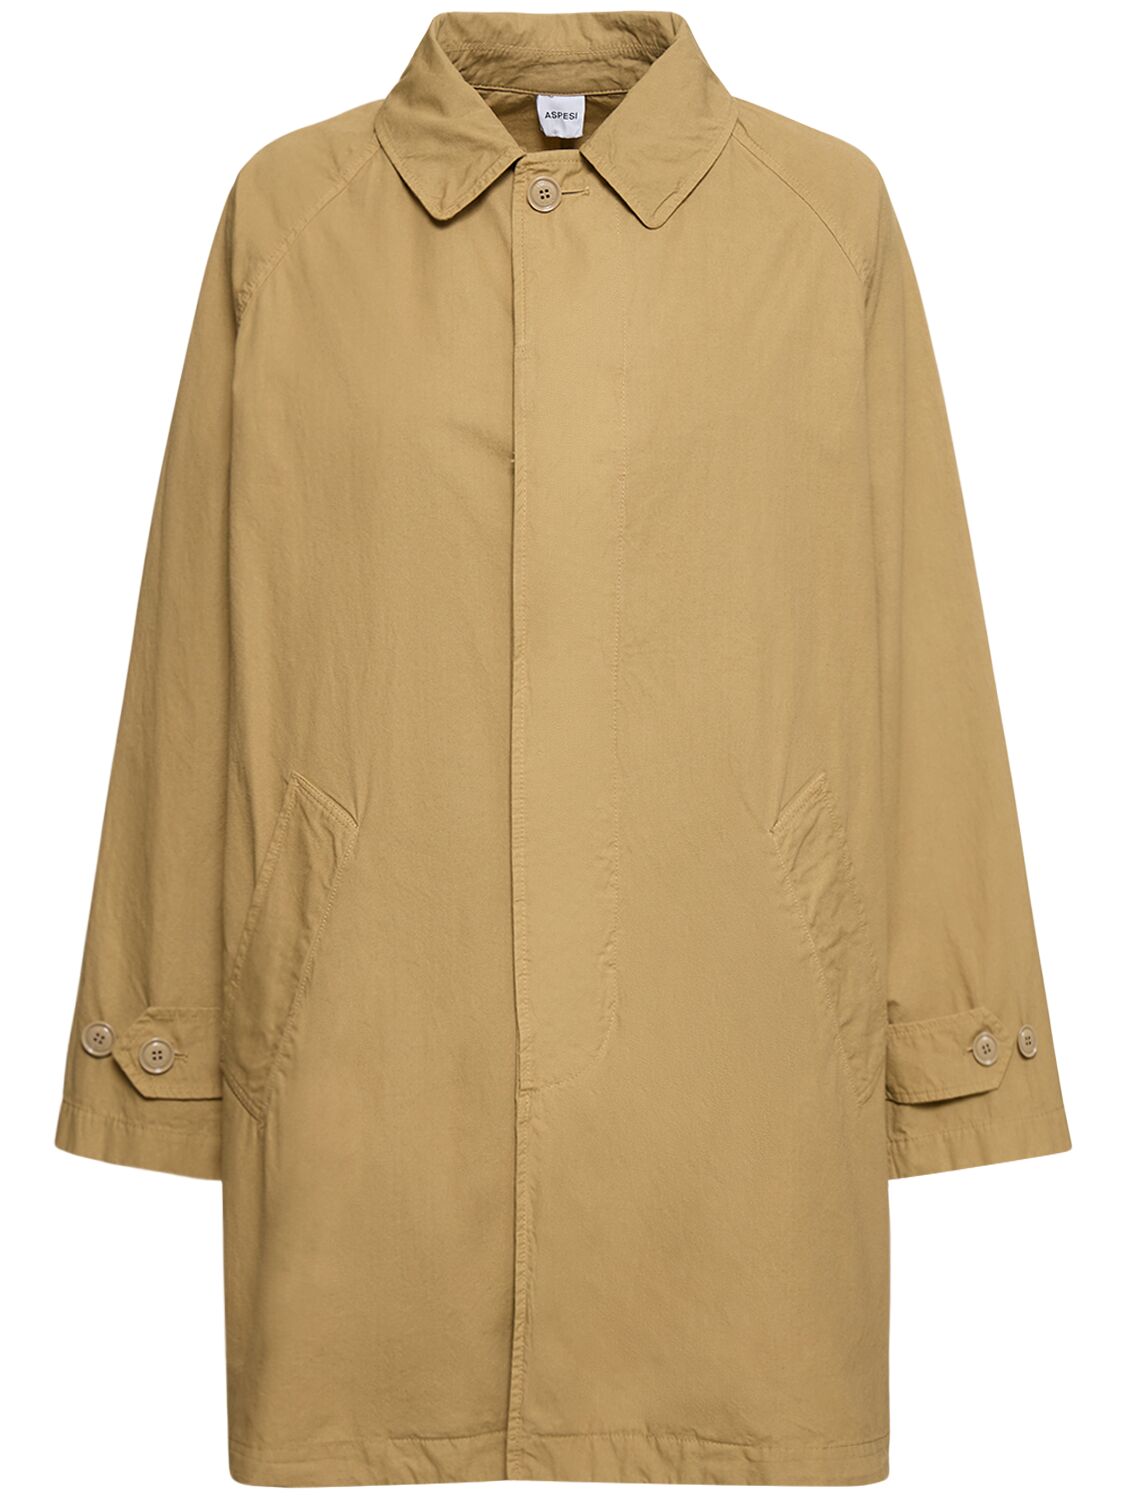 Image of Cotton Canvas Short Trench Coat